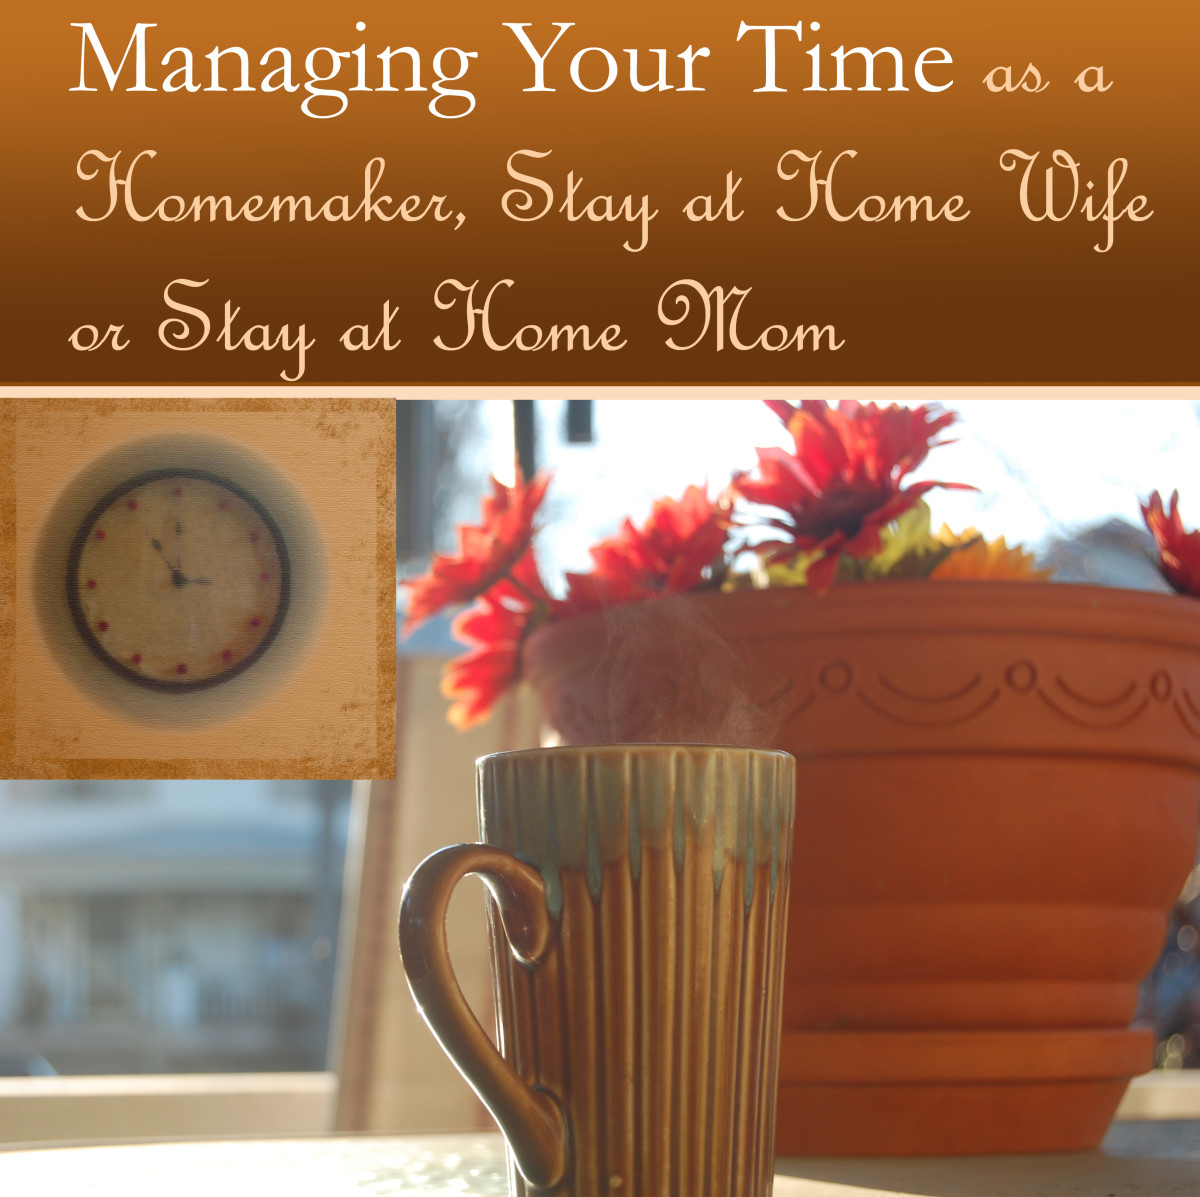 Managing Your Time as a Homemaker, Stay at Home Wife or Stay at Home Mom